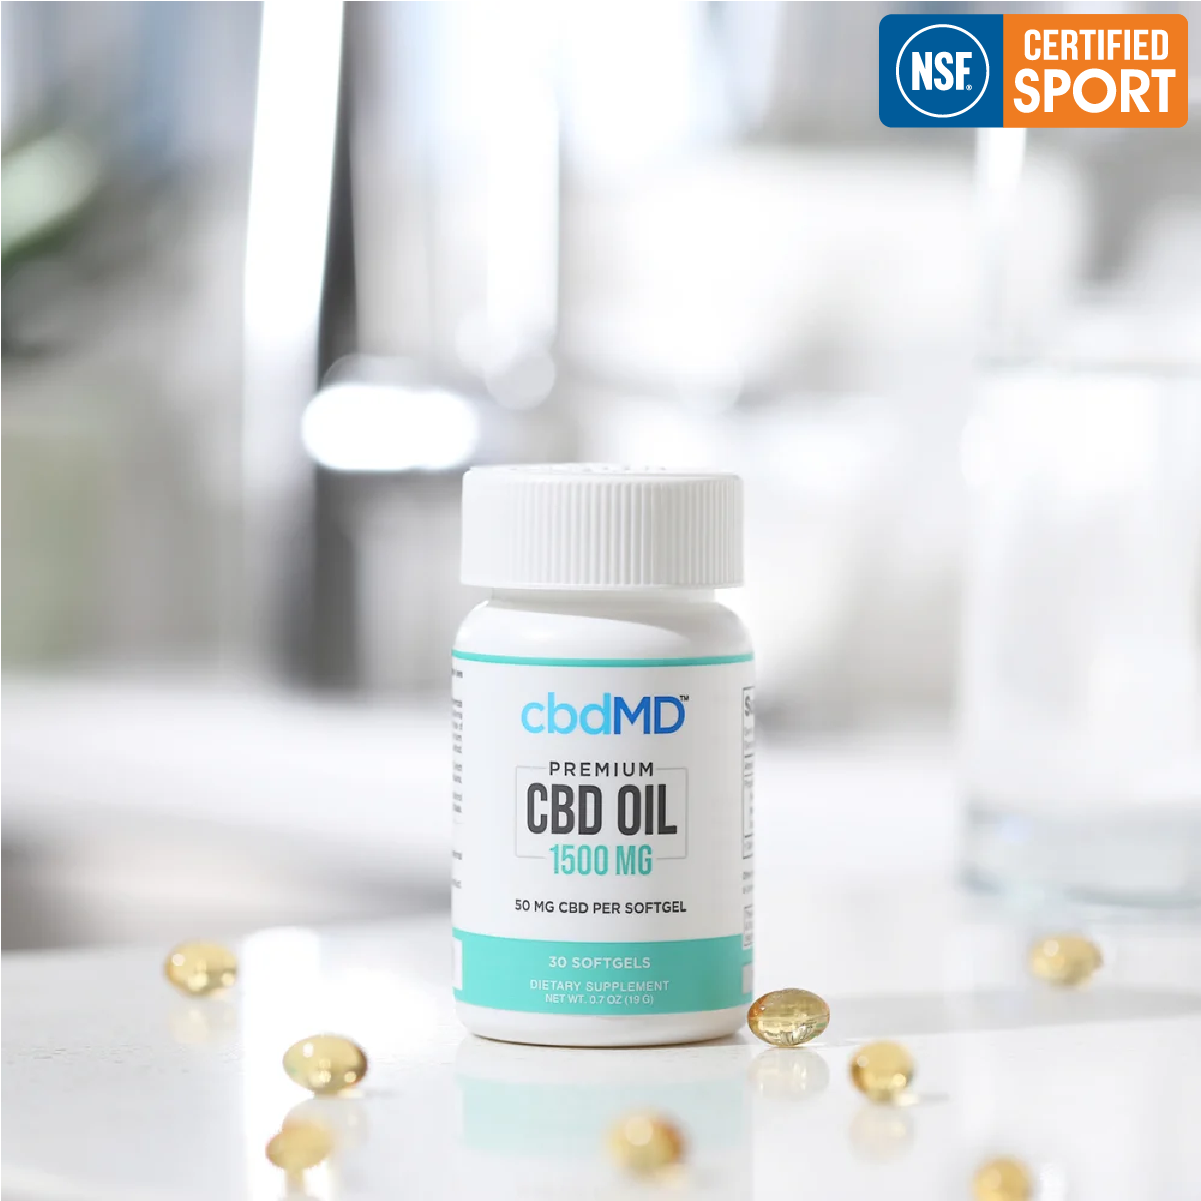 CBD Oil Softgels 1500 MG - 30 COUNT (NSF Certified for Sport)